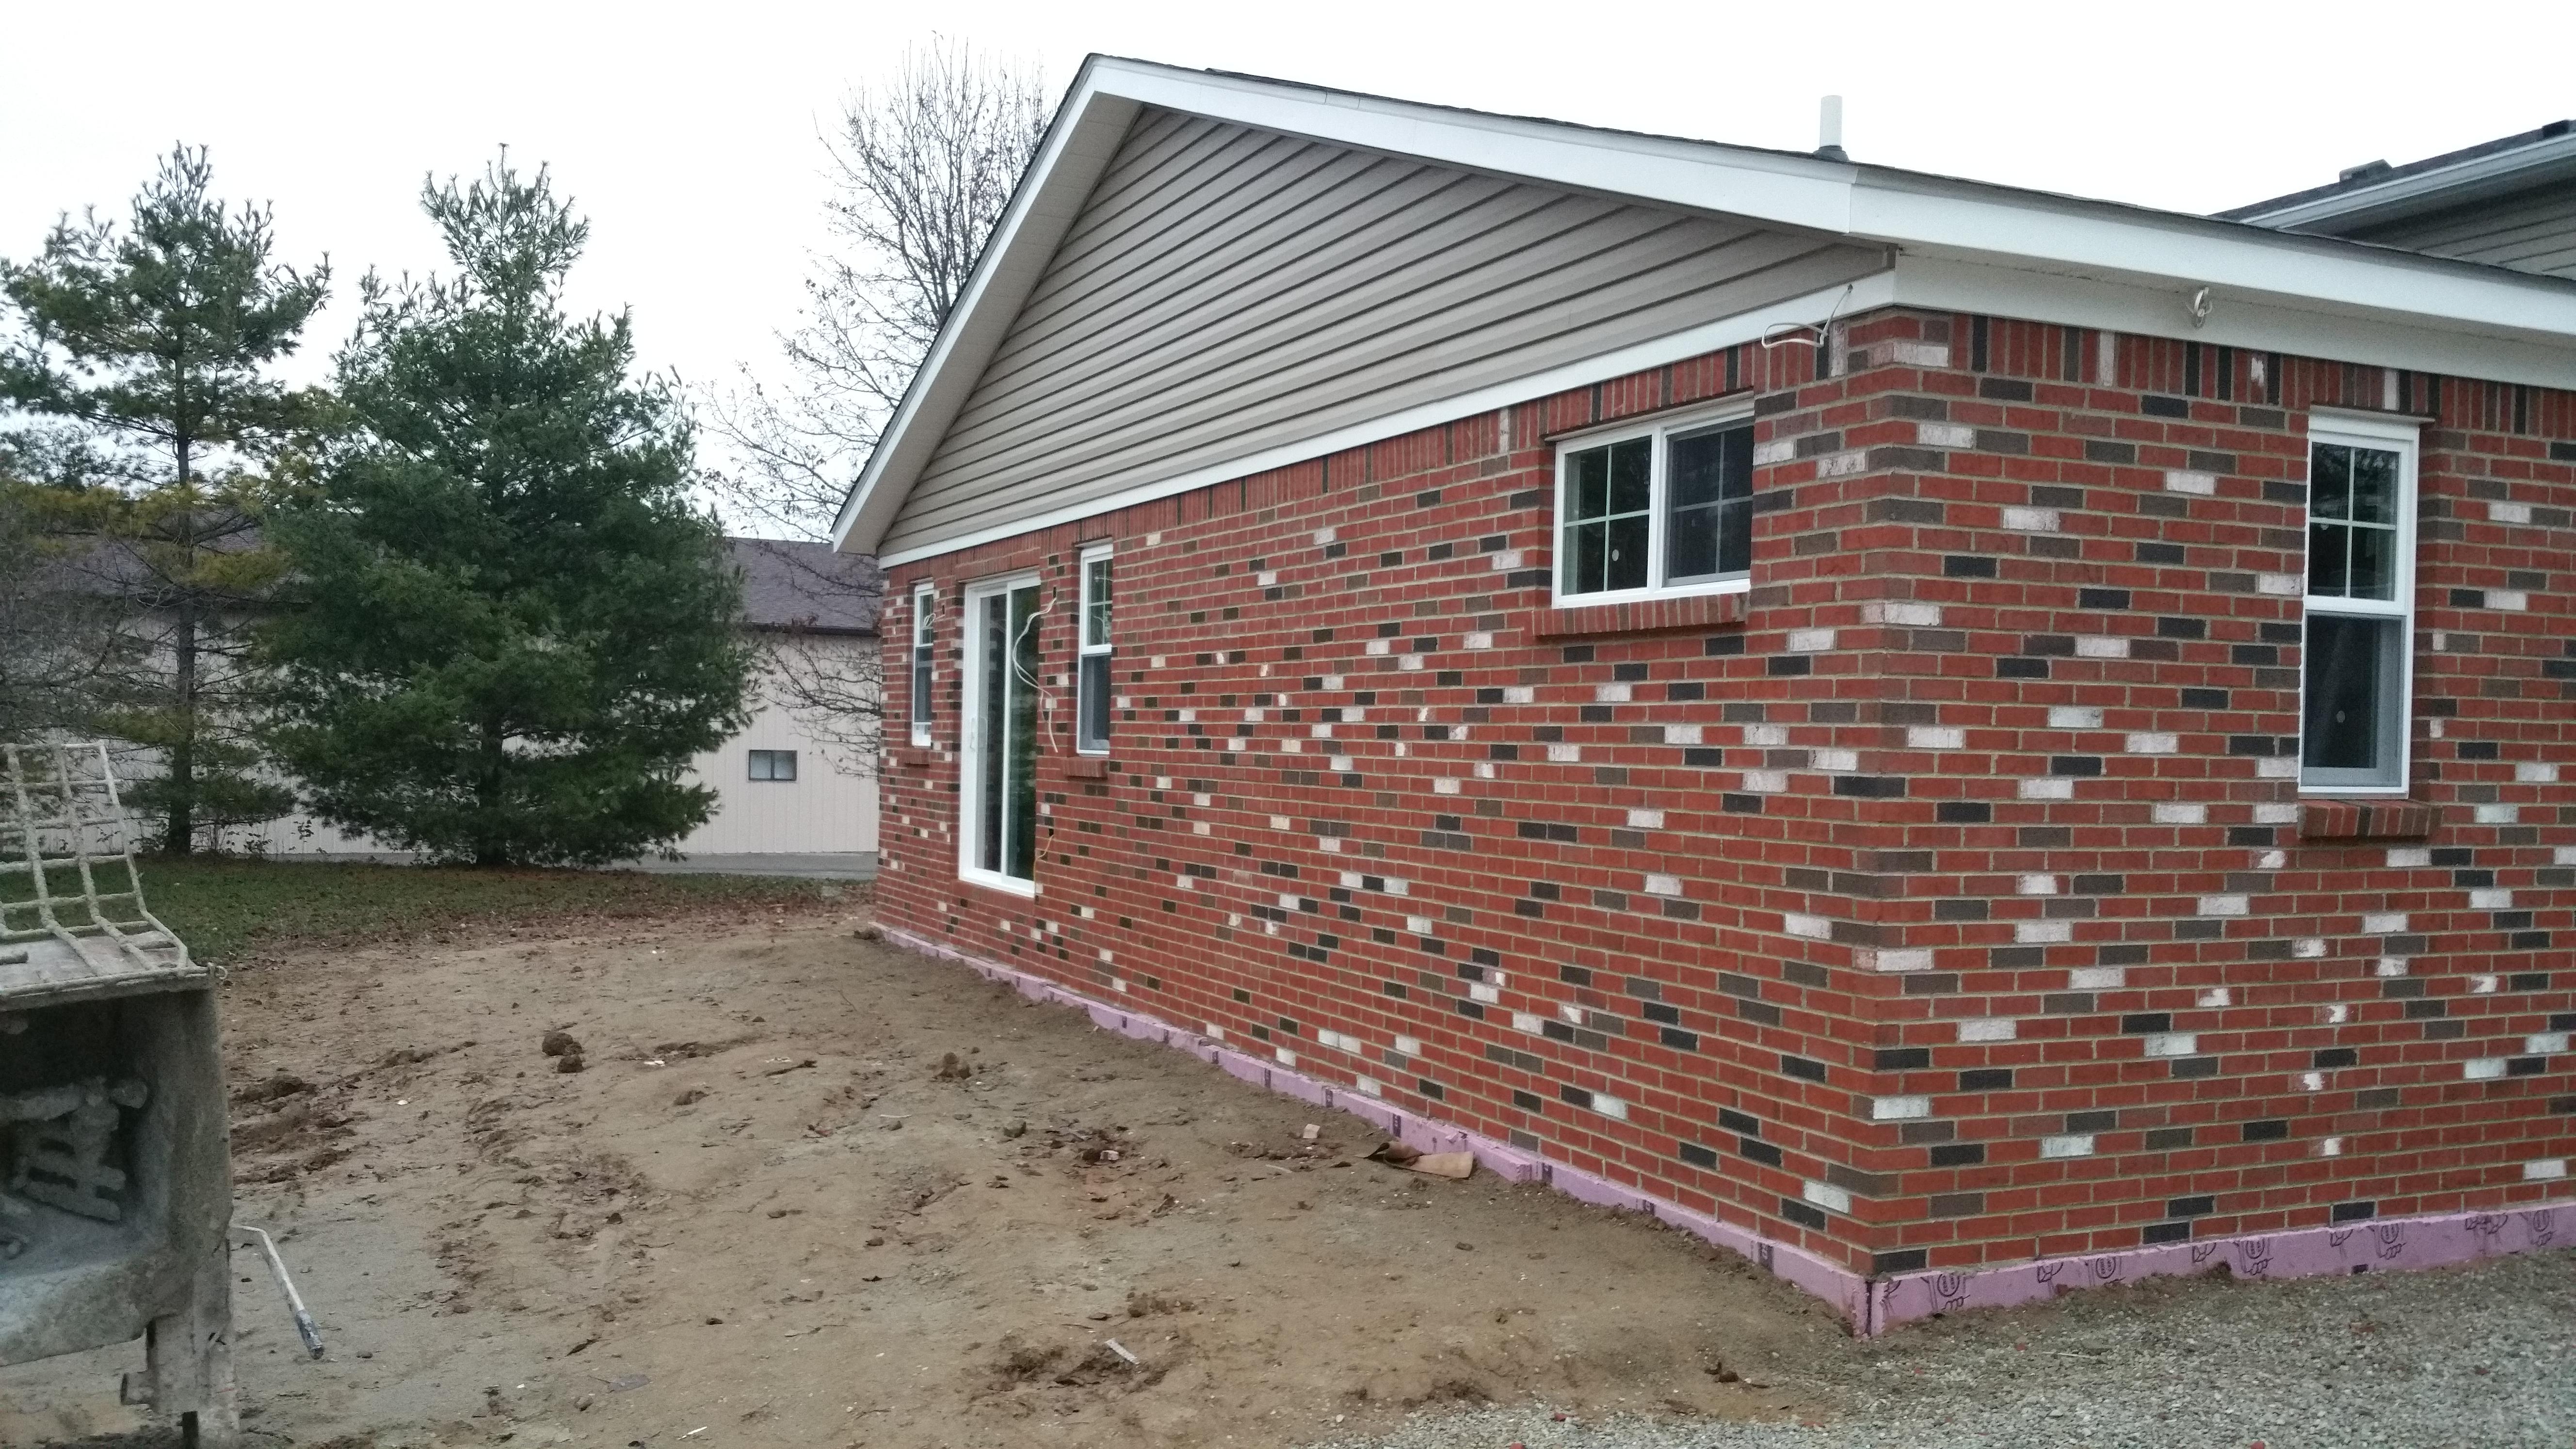 Here is a room addition we actually had to lay different types of brick and blend them together to match the rest of the house